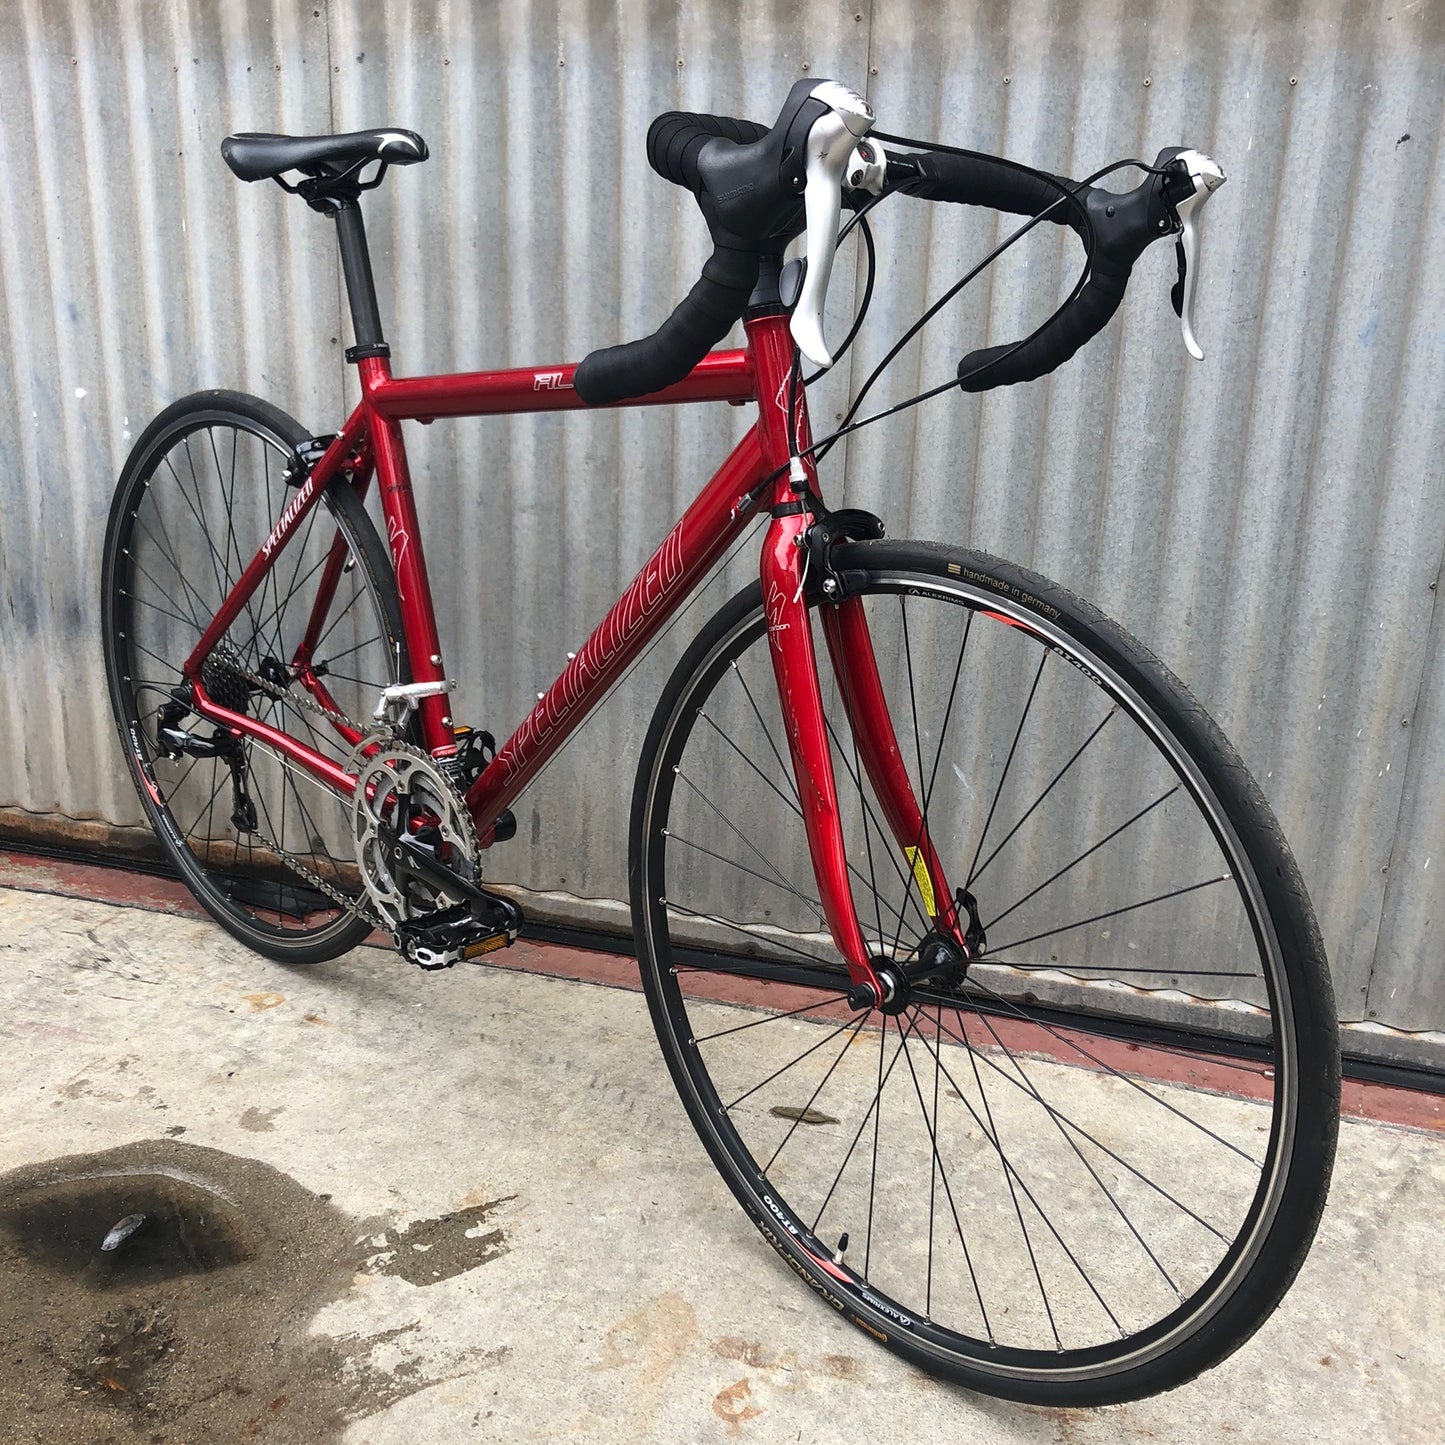 Specialized Allez - Alloy Road Bike in Terrific Condition and a Great Color!